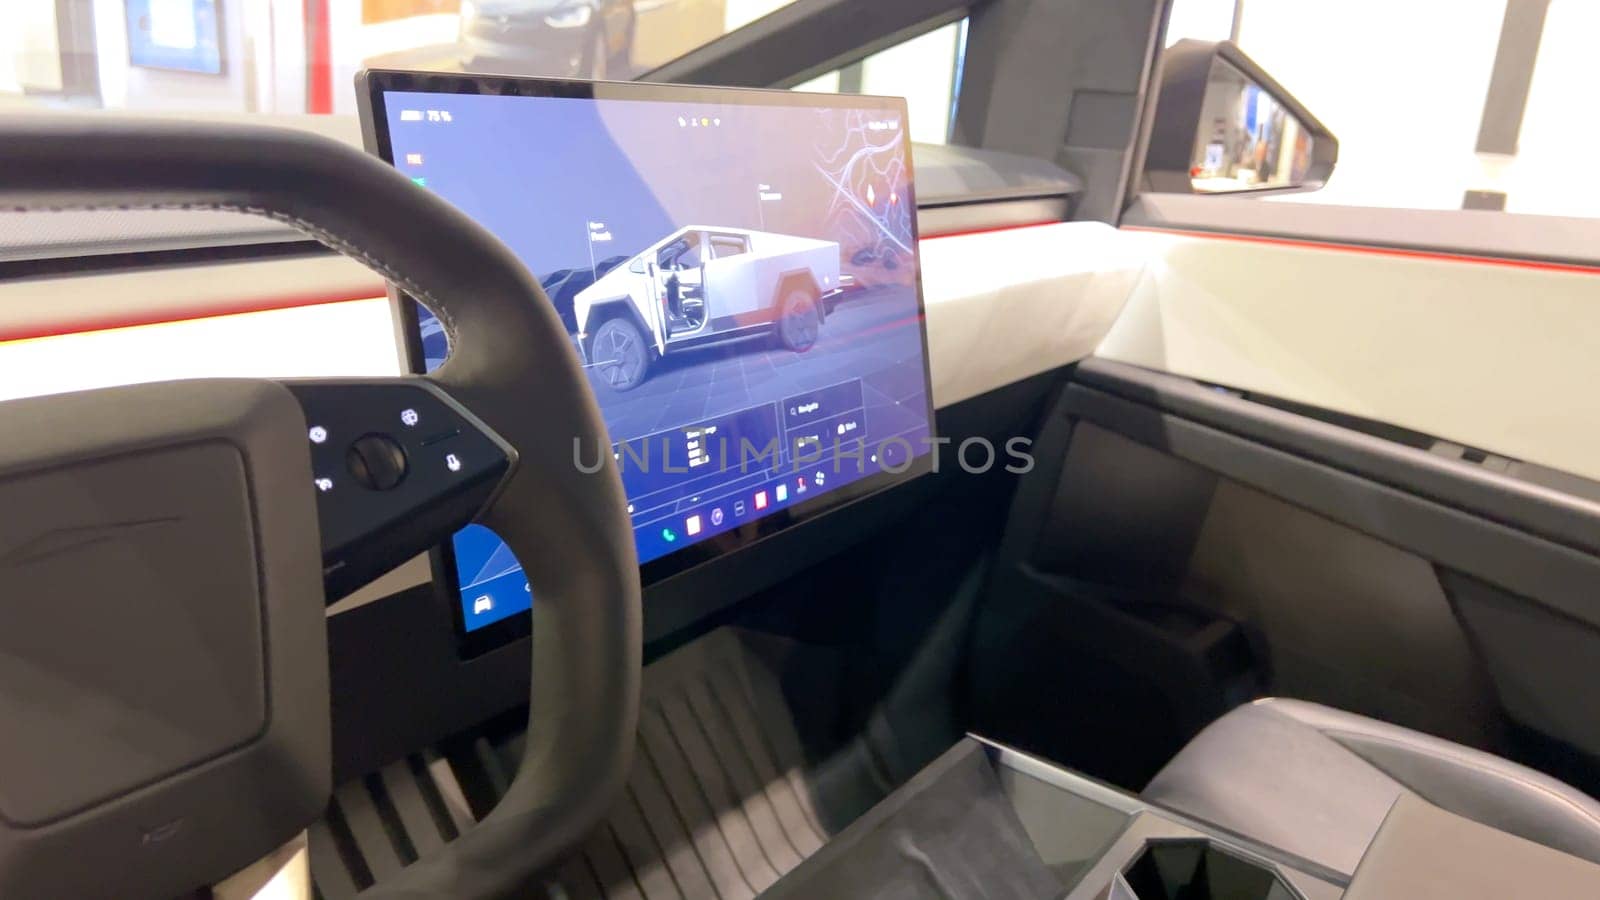 Tesla Cybertruck on Display at Tesla Store in Park Meadows Mall by arinahabich